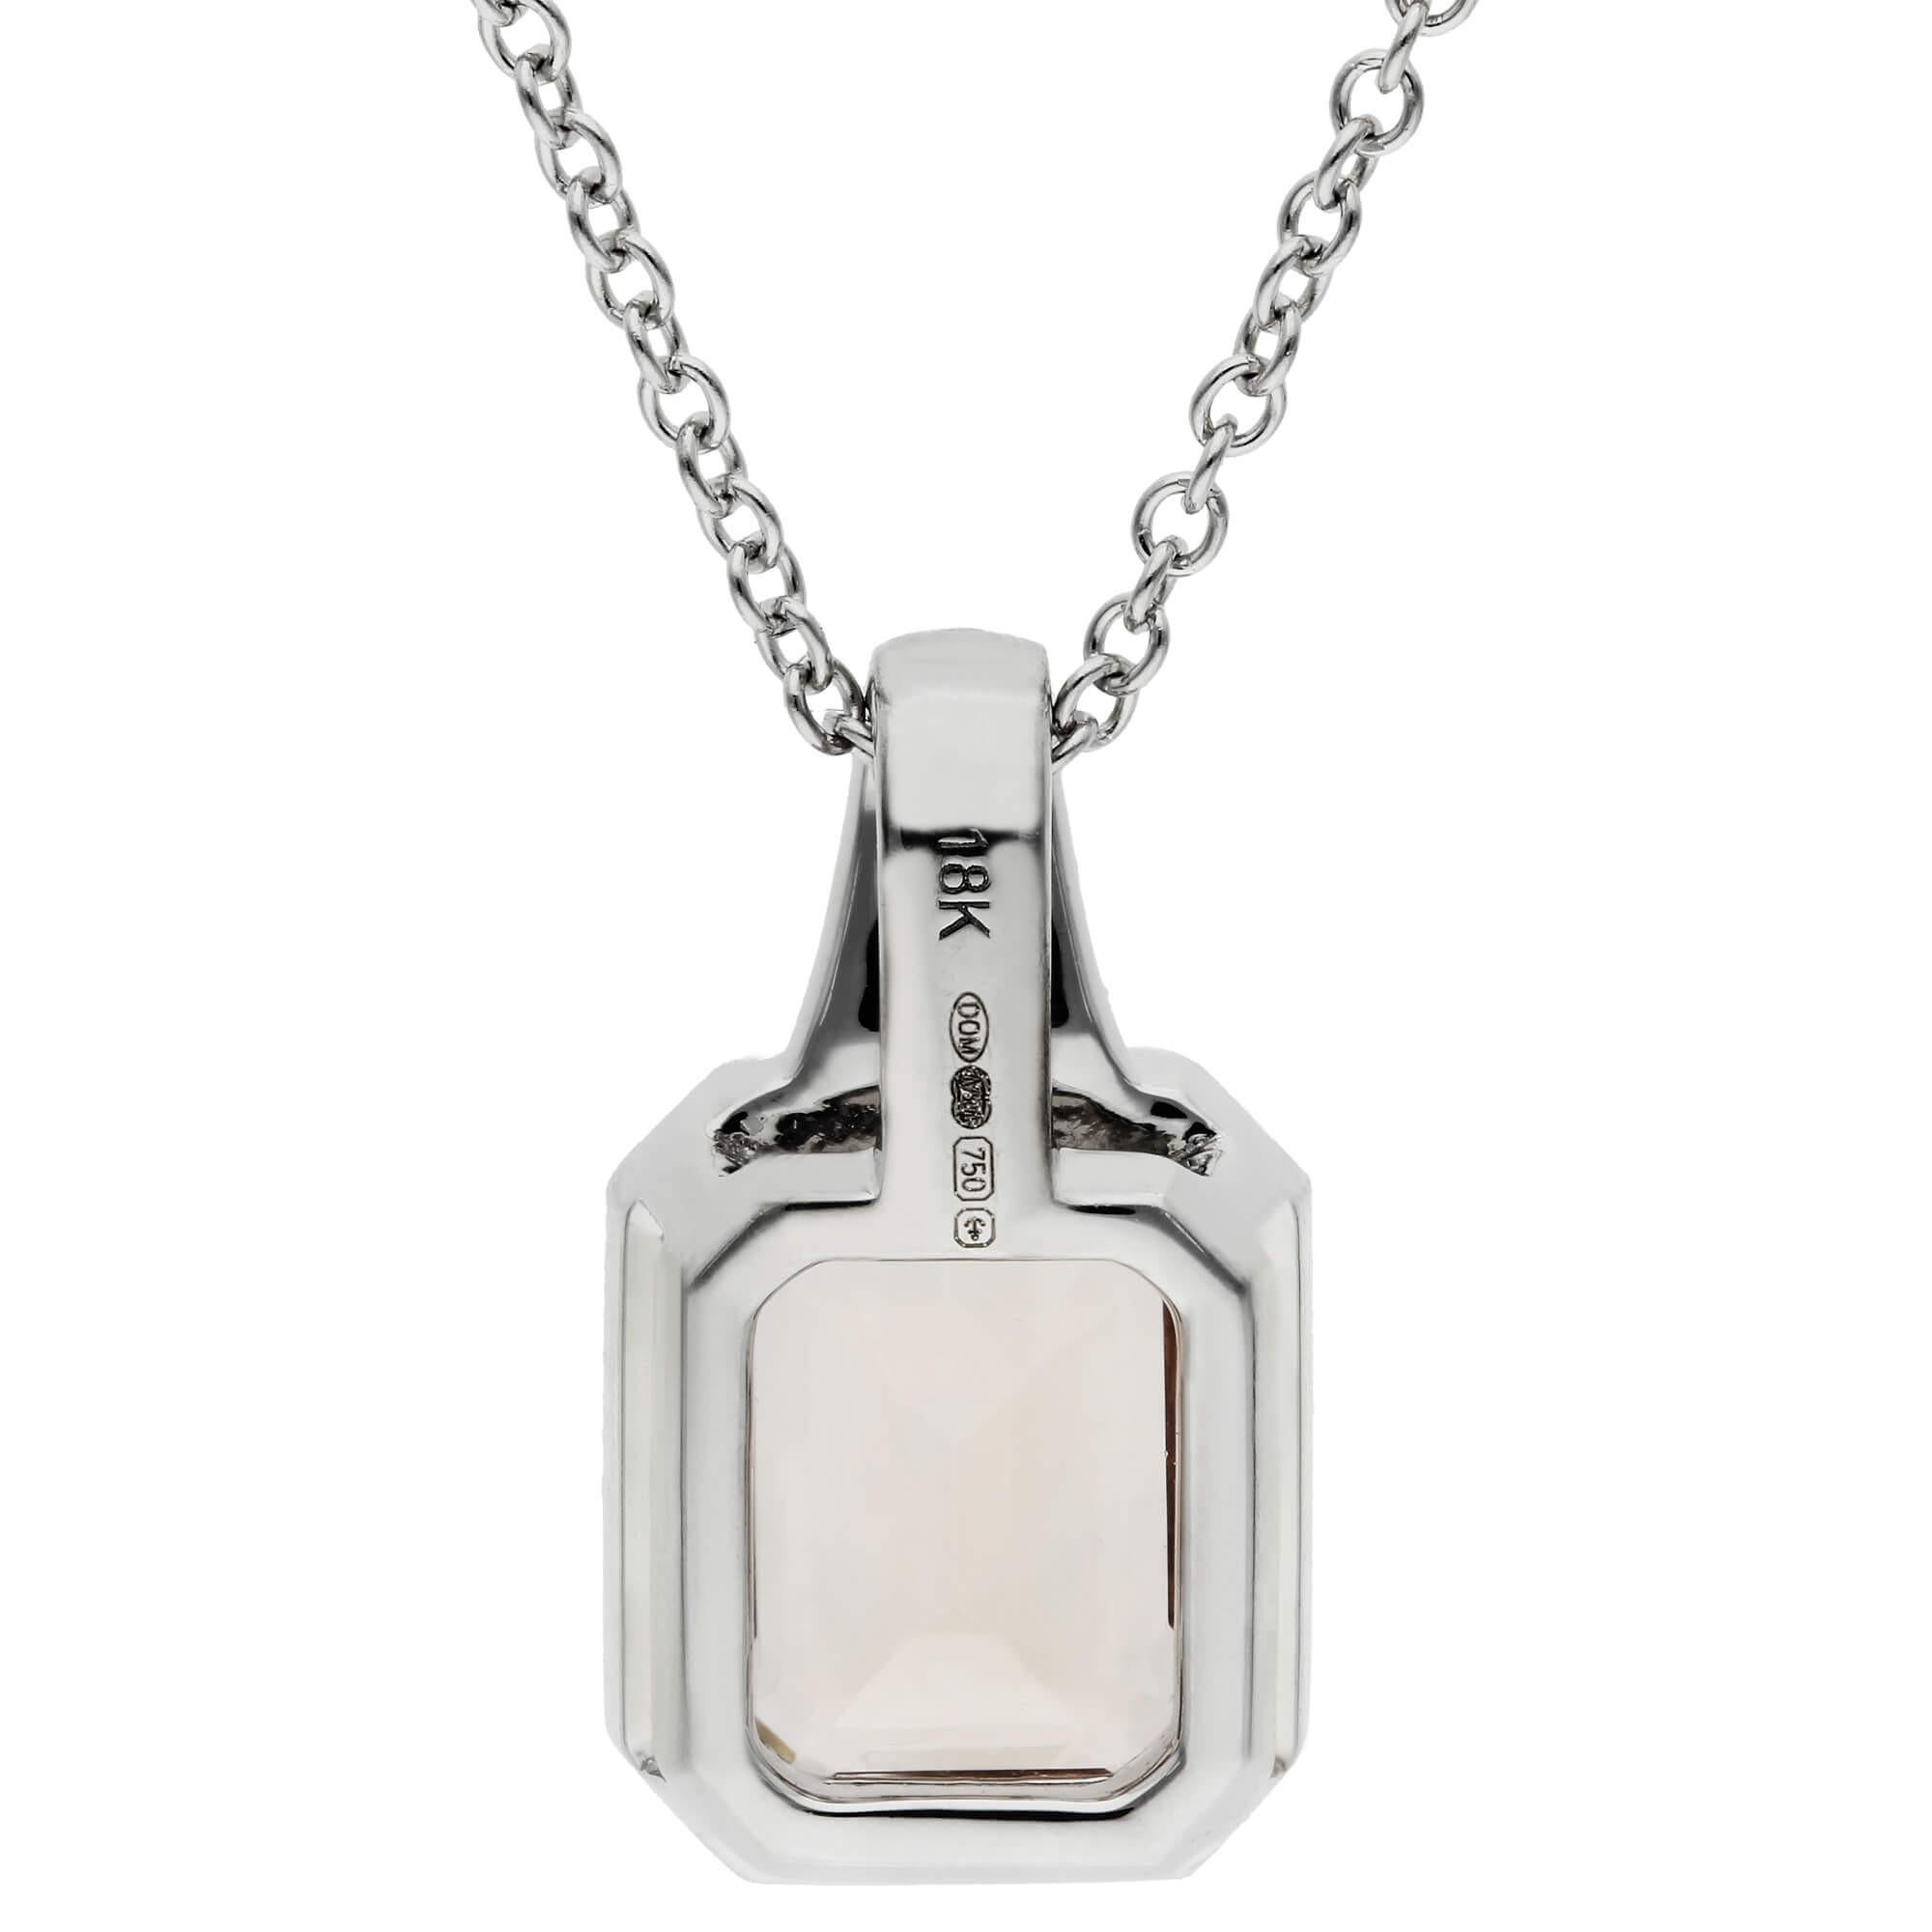 Art Deco Inspired 18ct White Gold 2.00ct Morganite & Diamond Pendant

This entrancing Morganite & Diamond Pendant, oozes elegance. The lustrous sheen of the luxury 18ct White Gold enhances the subtle pink tones of this special morganite gemstone and